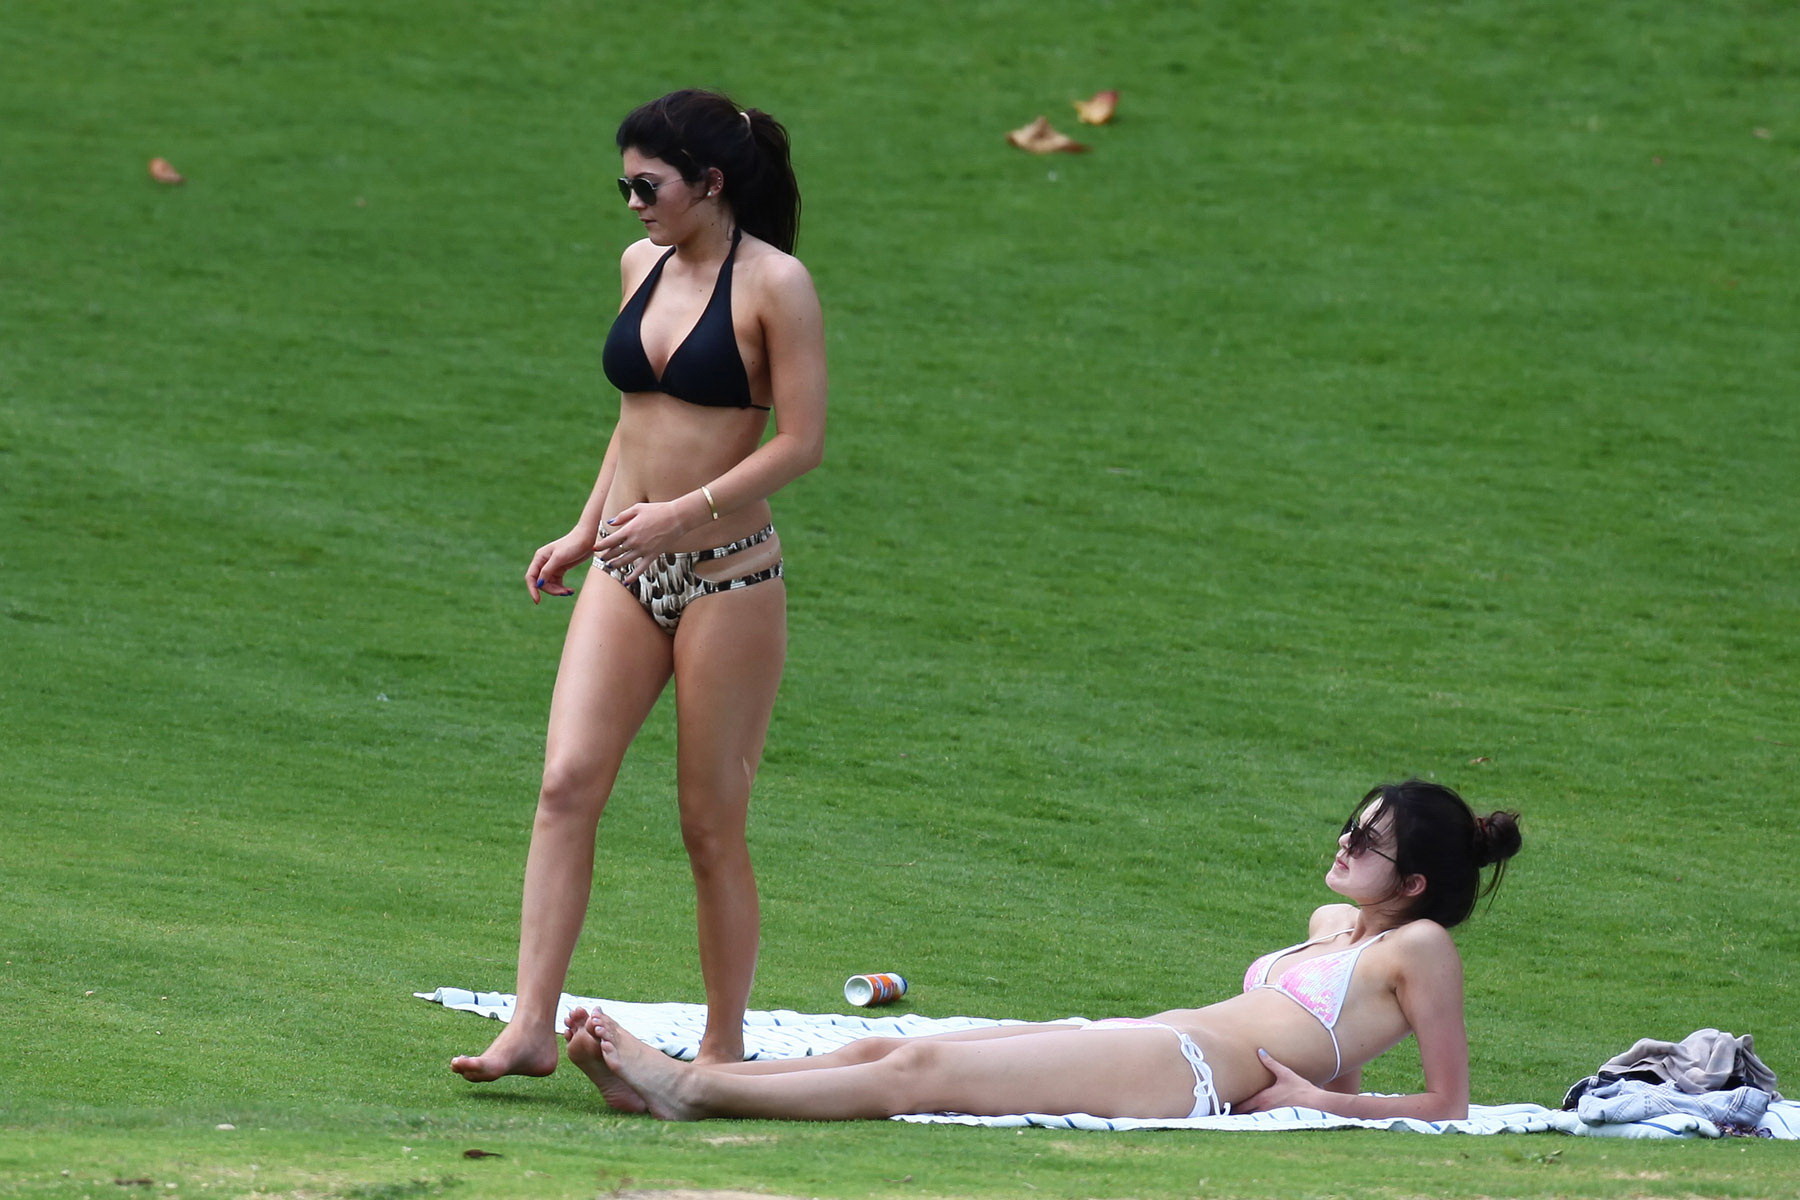 Kylie and Kendall Jenner tanning their hot bodies in skimpy bikini sets on a mea #75174060